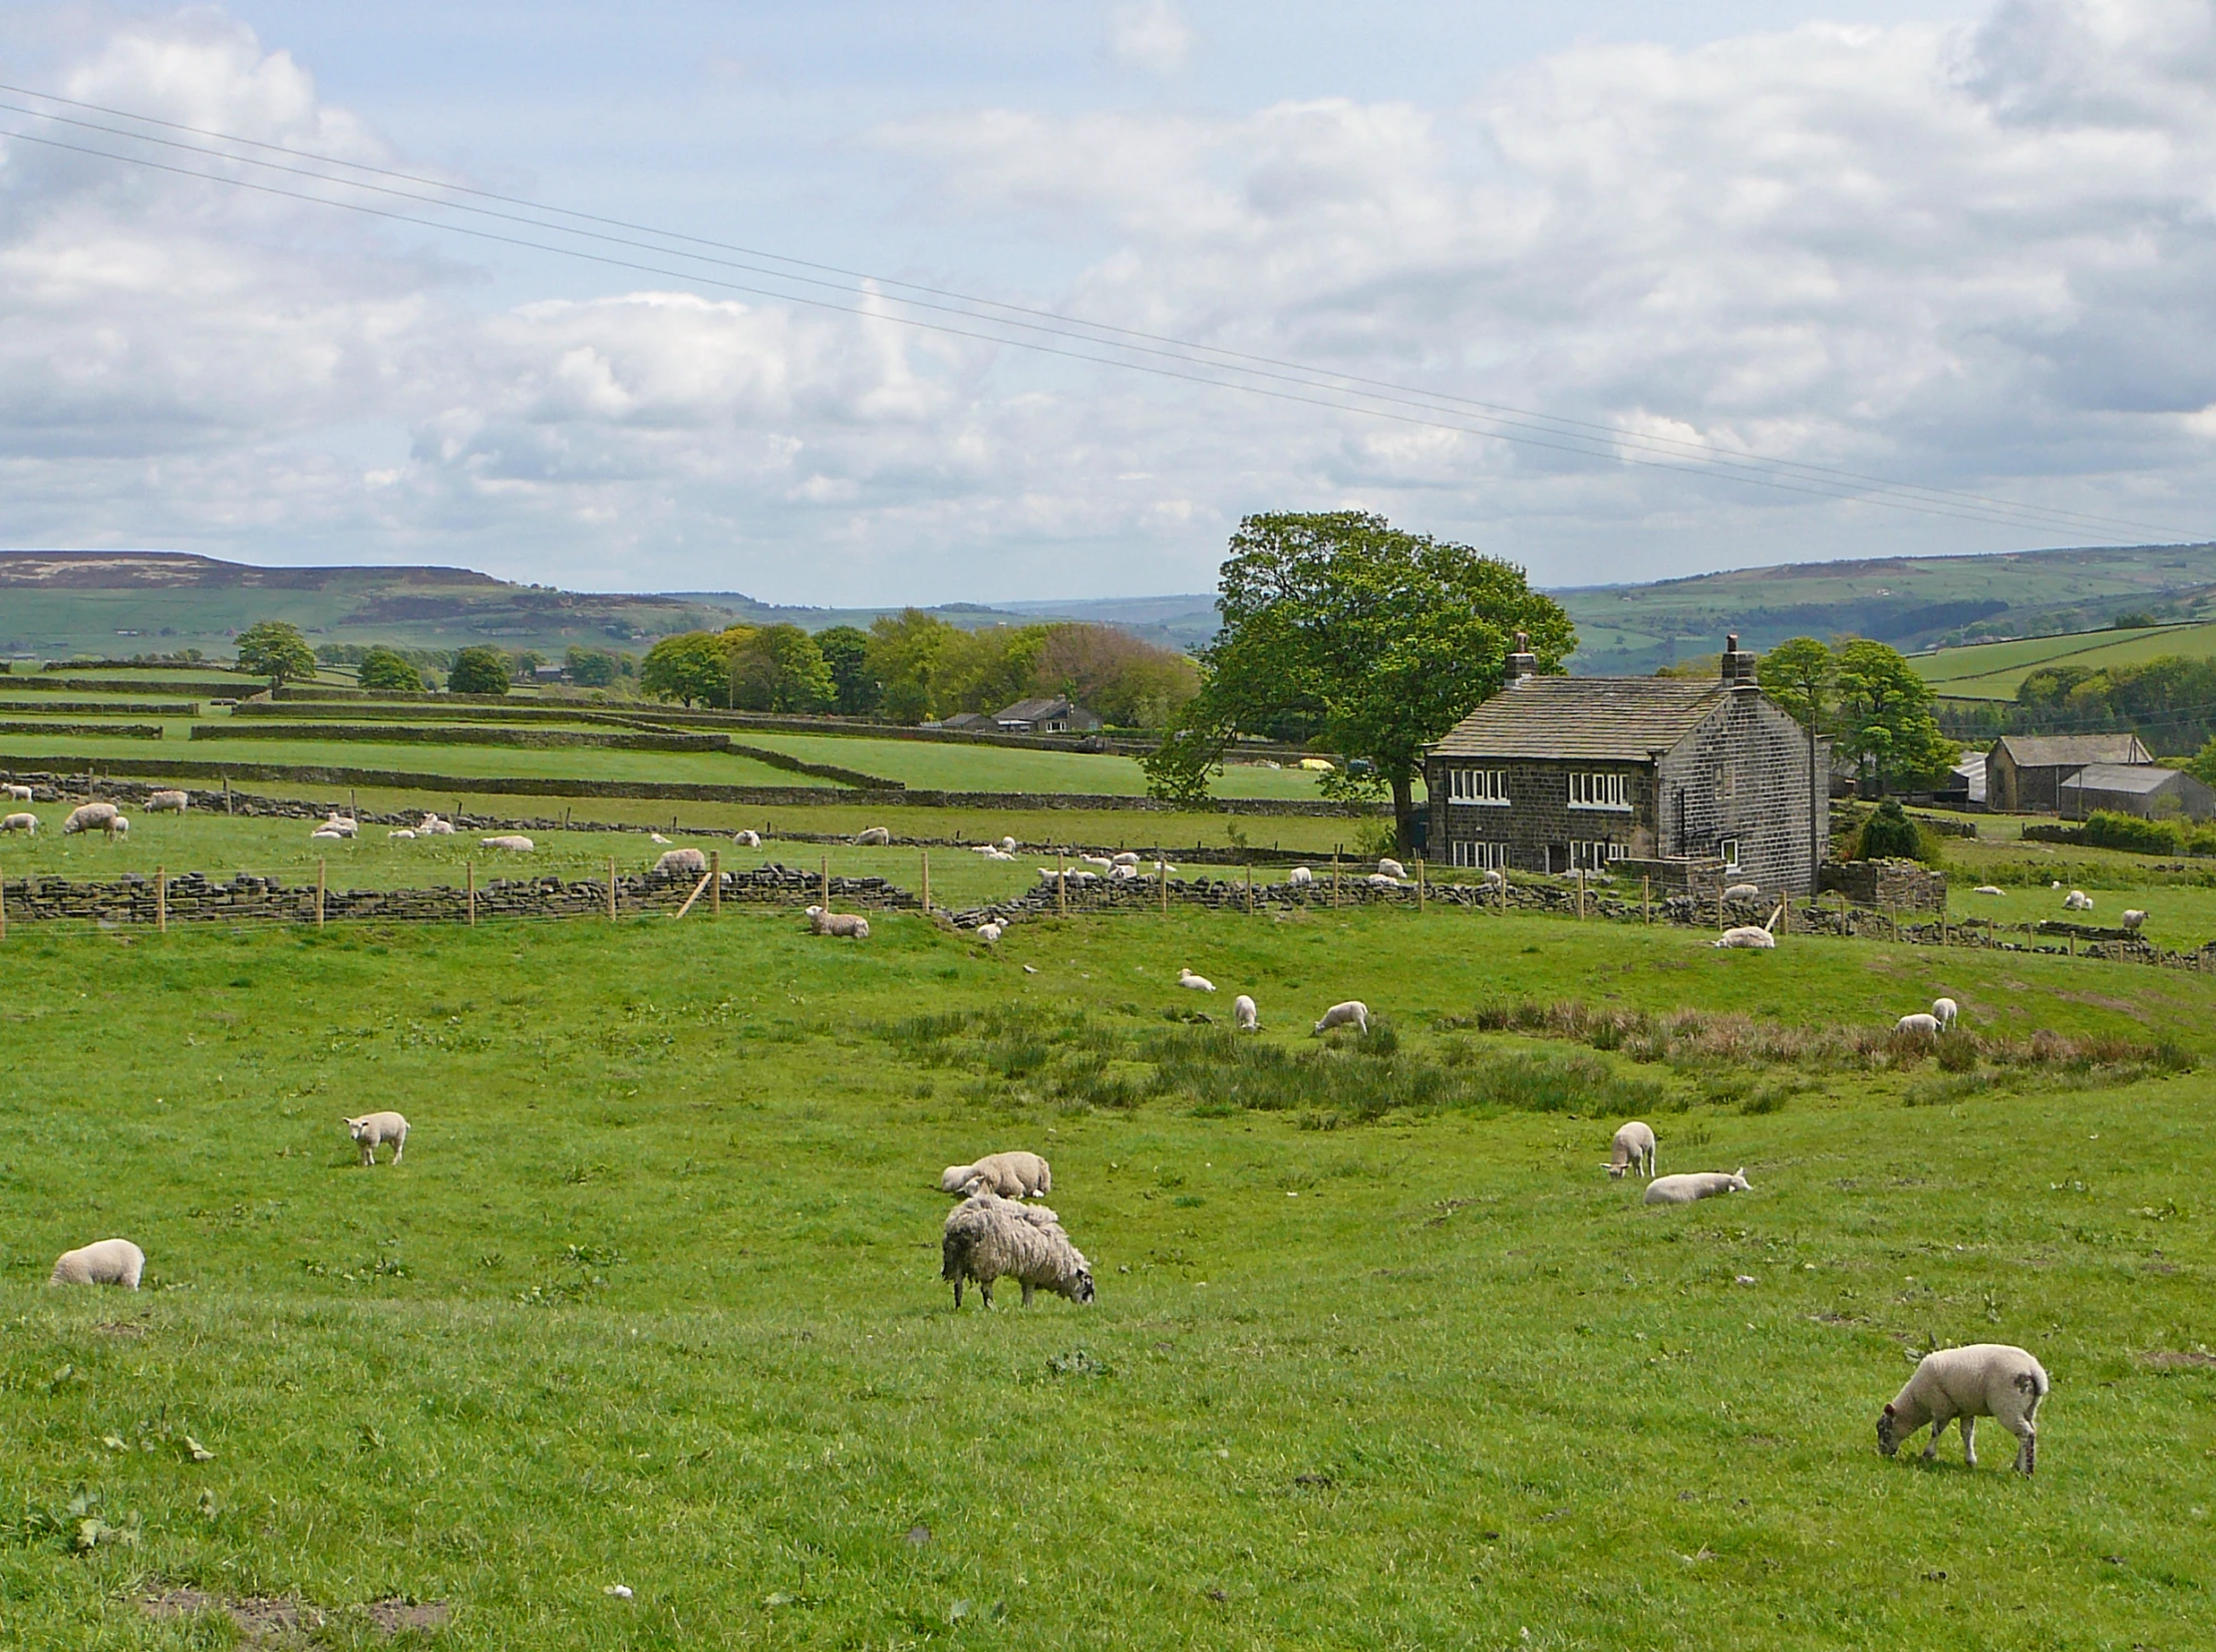 sheep are grazing in a green pasture, with an old barn in the background